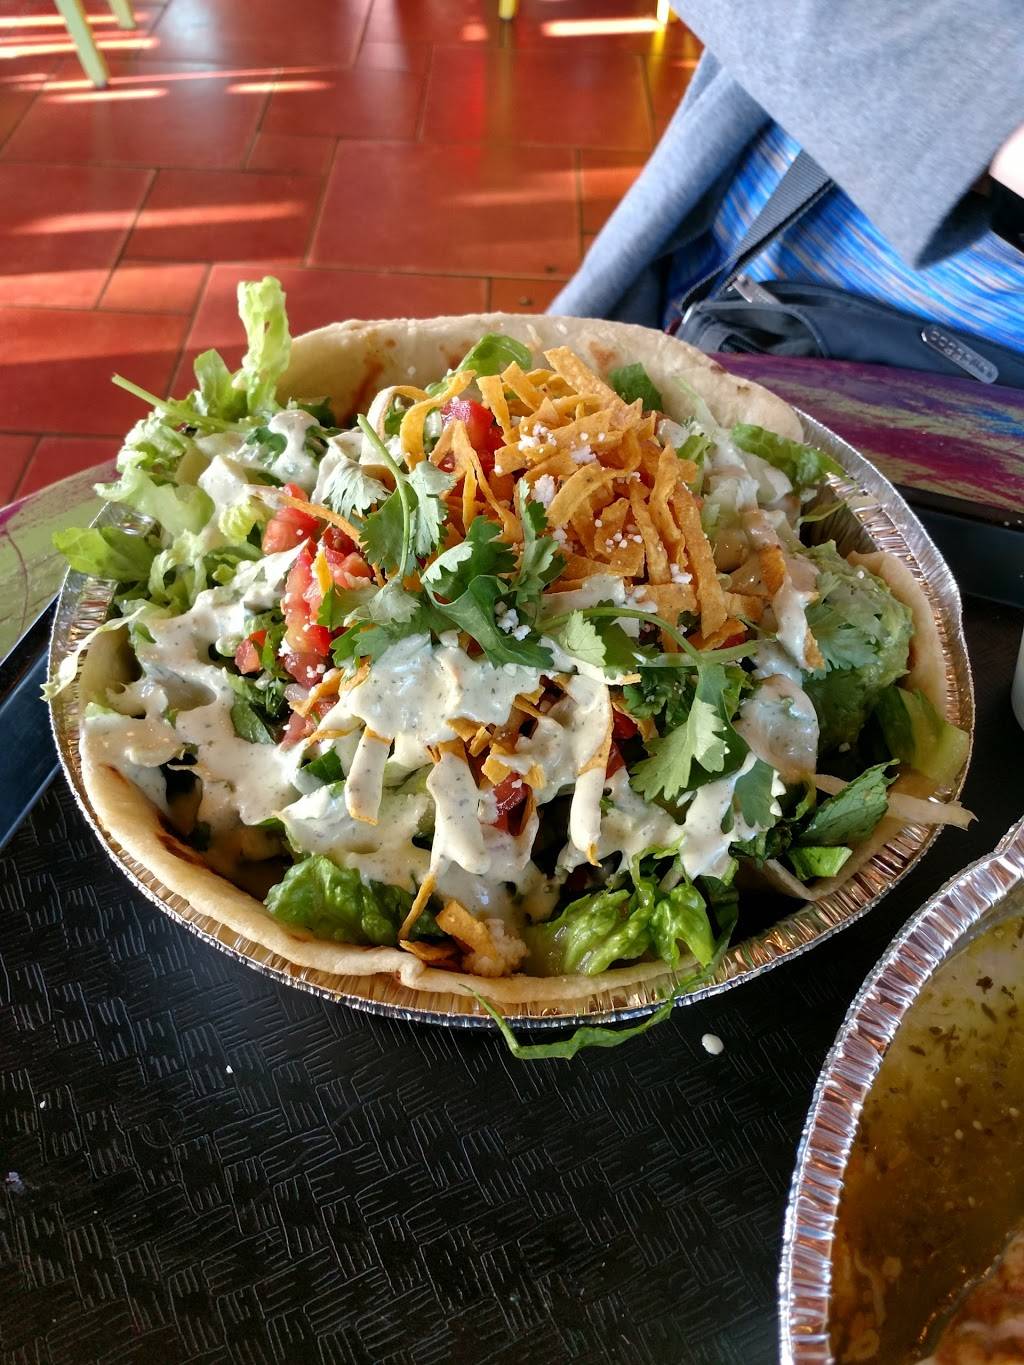 Cafe Rio Mexican Grill | meal takeaway | 9002 W Sahara Ave, Las Vegas, NV 89117, USA | 7029481500 OR +1 702-948-1500